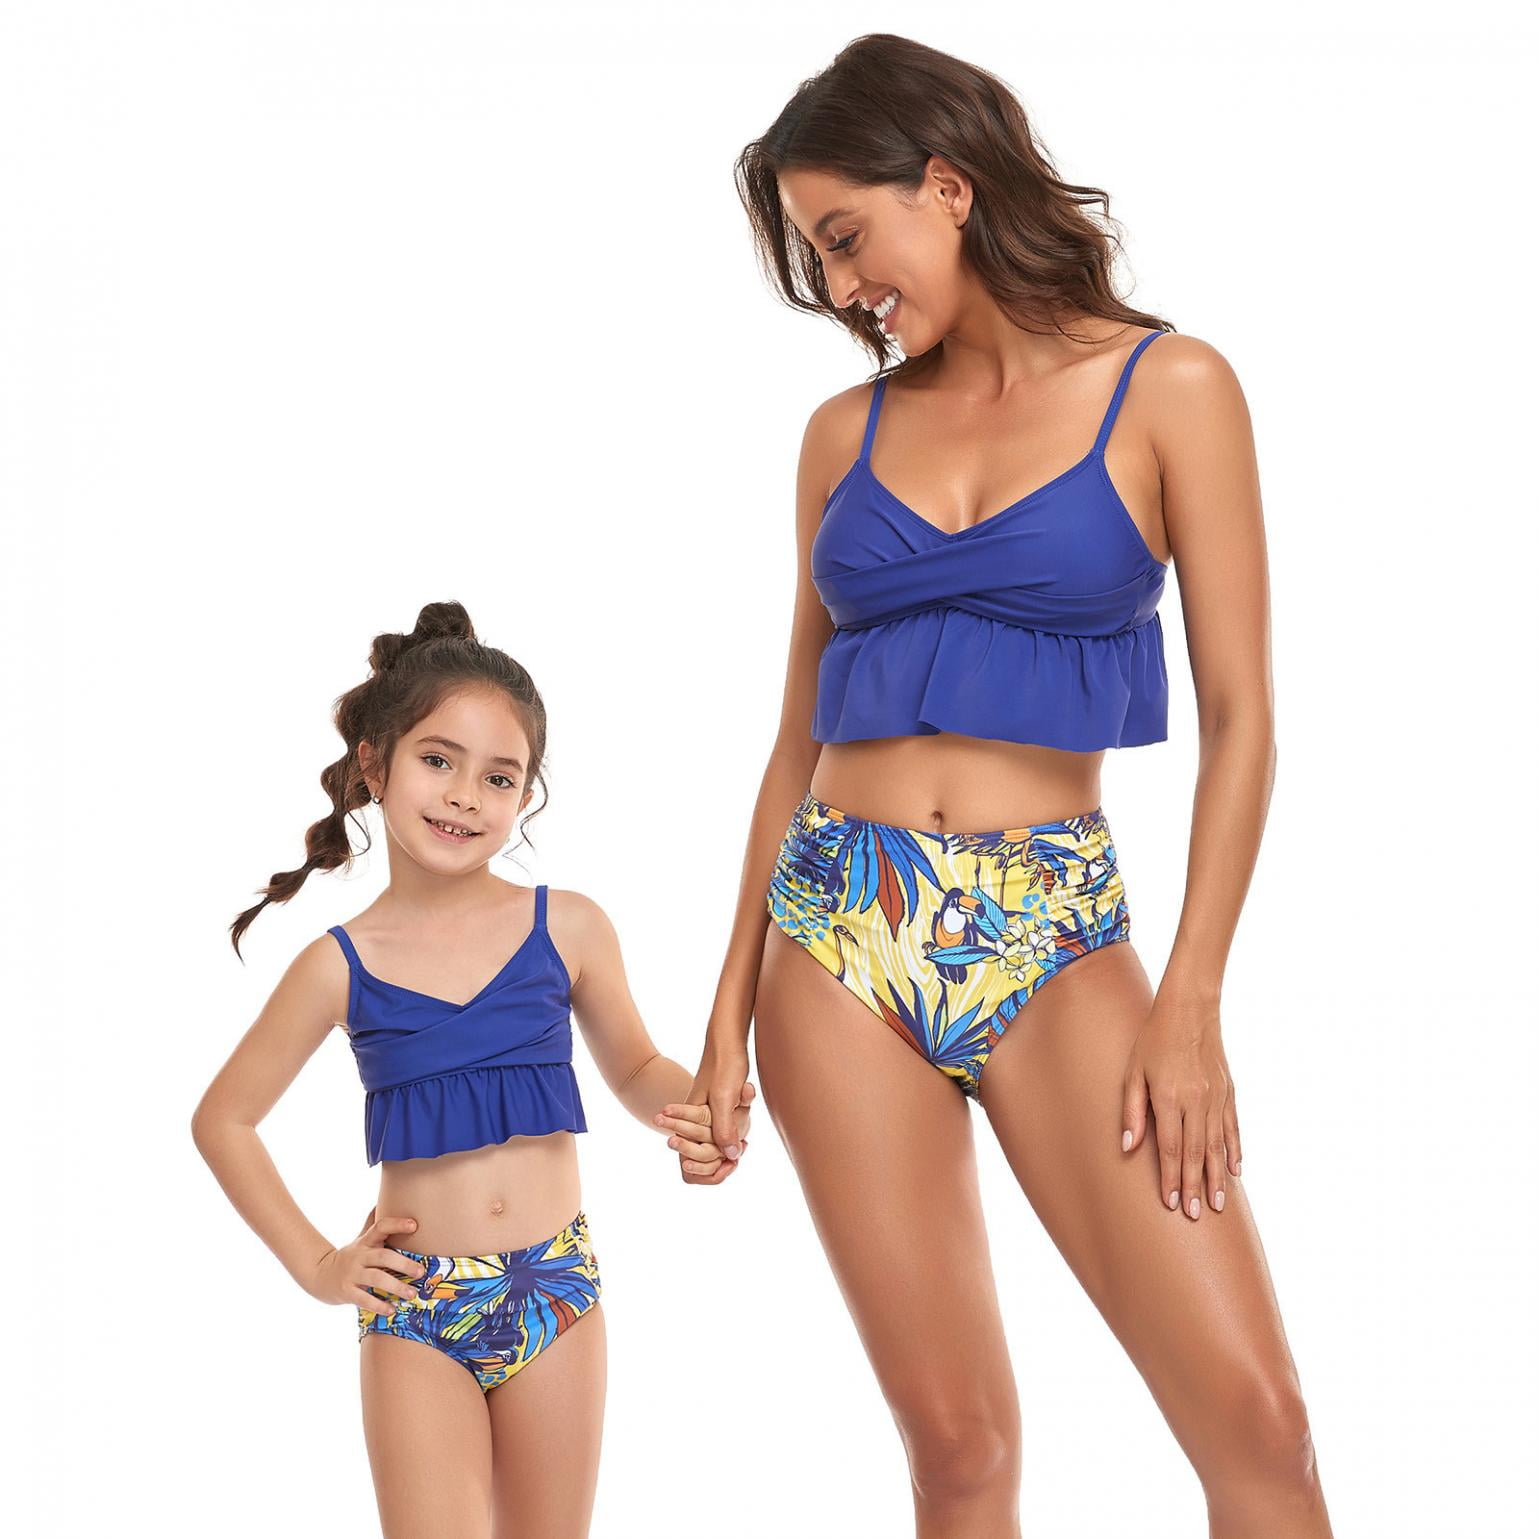 Christmas Gifts Deals for Days,Jovati Mommy and Me Swimsuits Two Piece Swimsuit Ruffle Falbala Swimwear Bathing Suits Mother and Daughter Matching